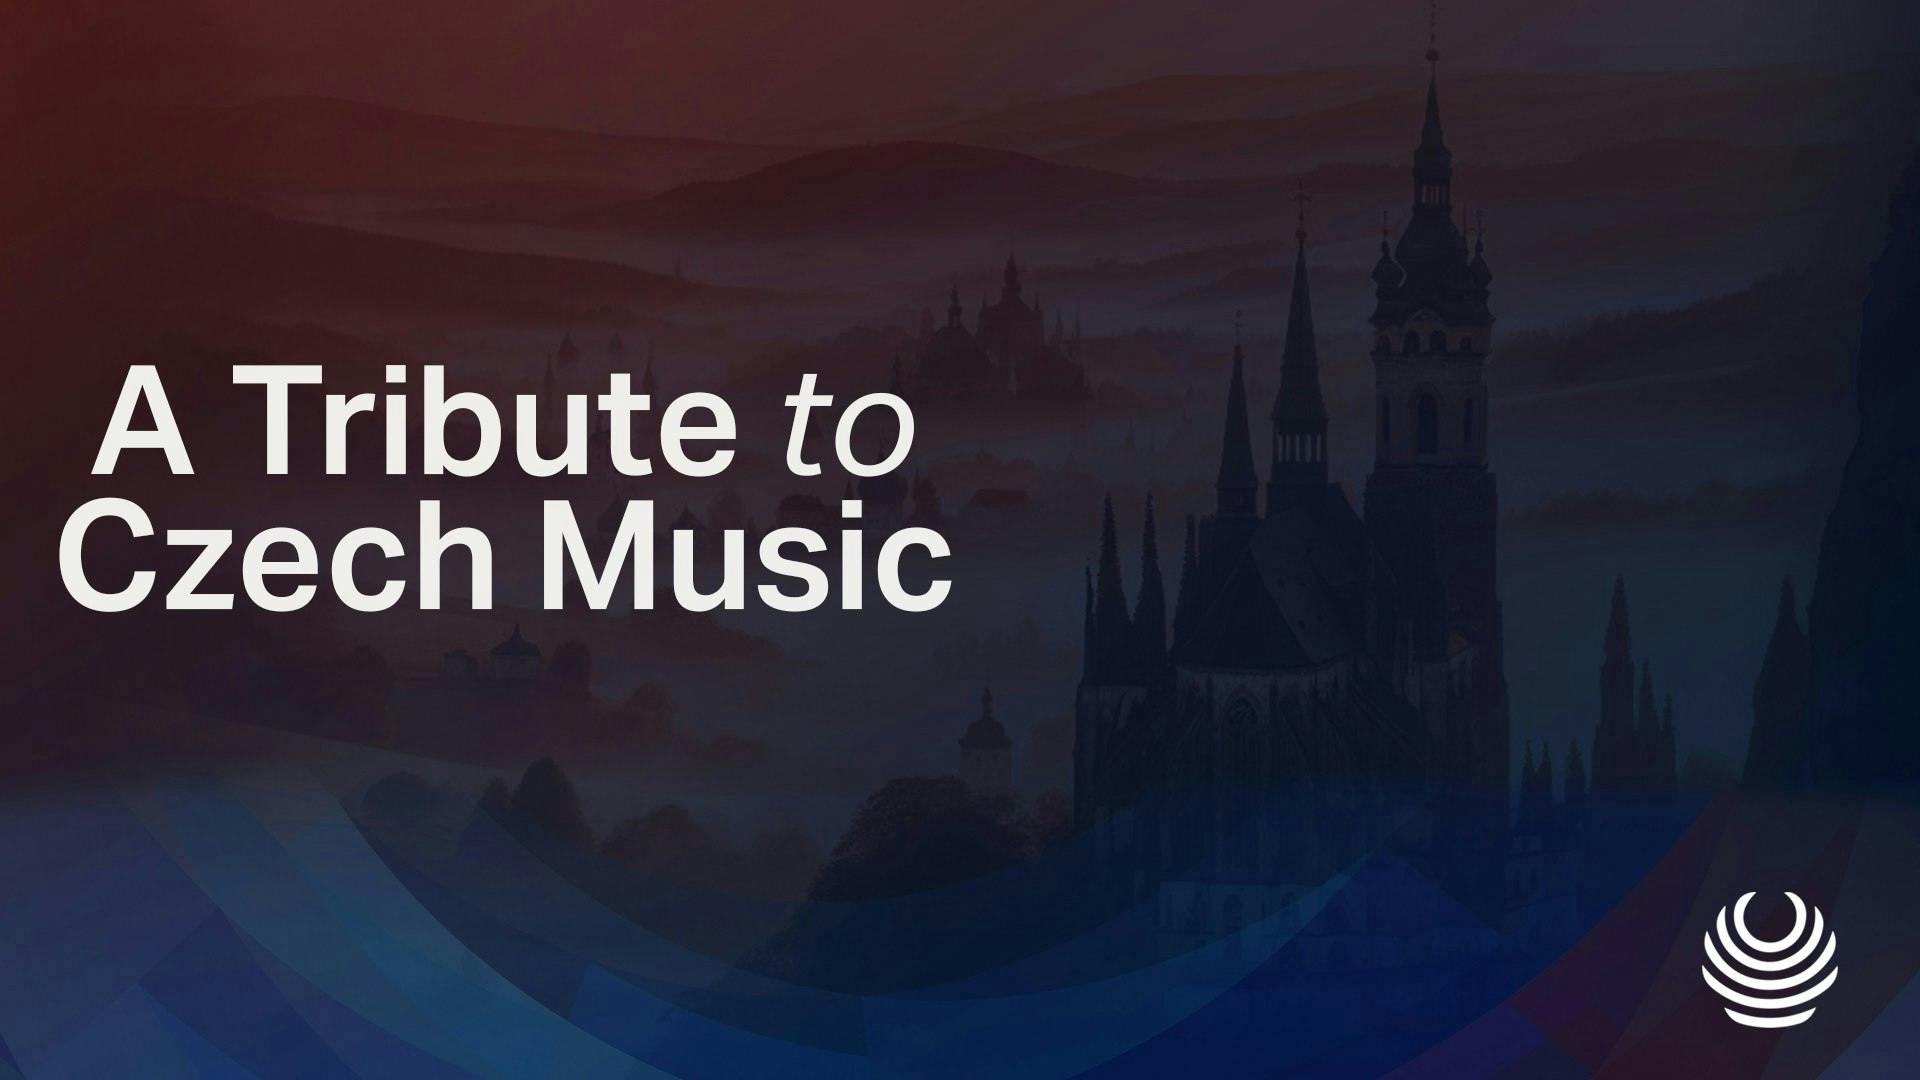 A Tribute to Czech Music